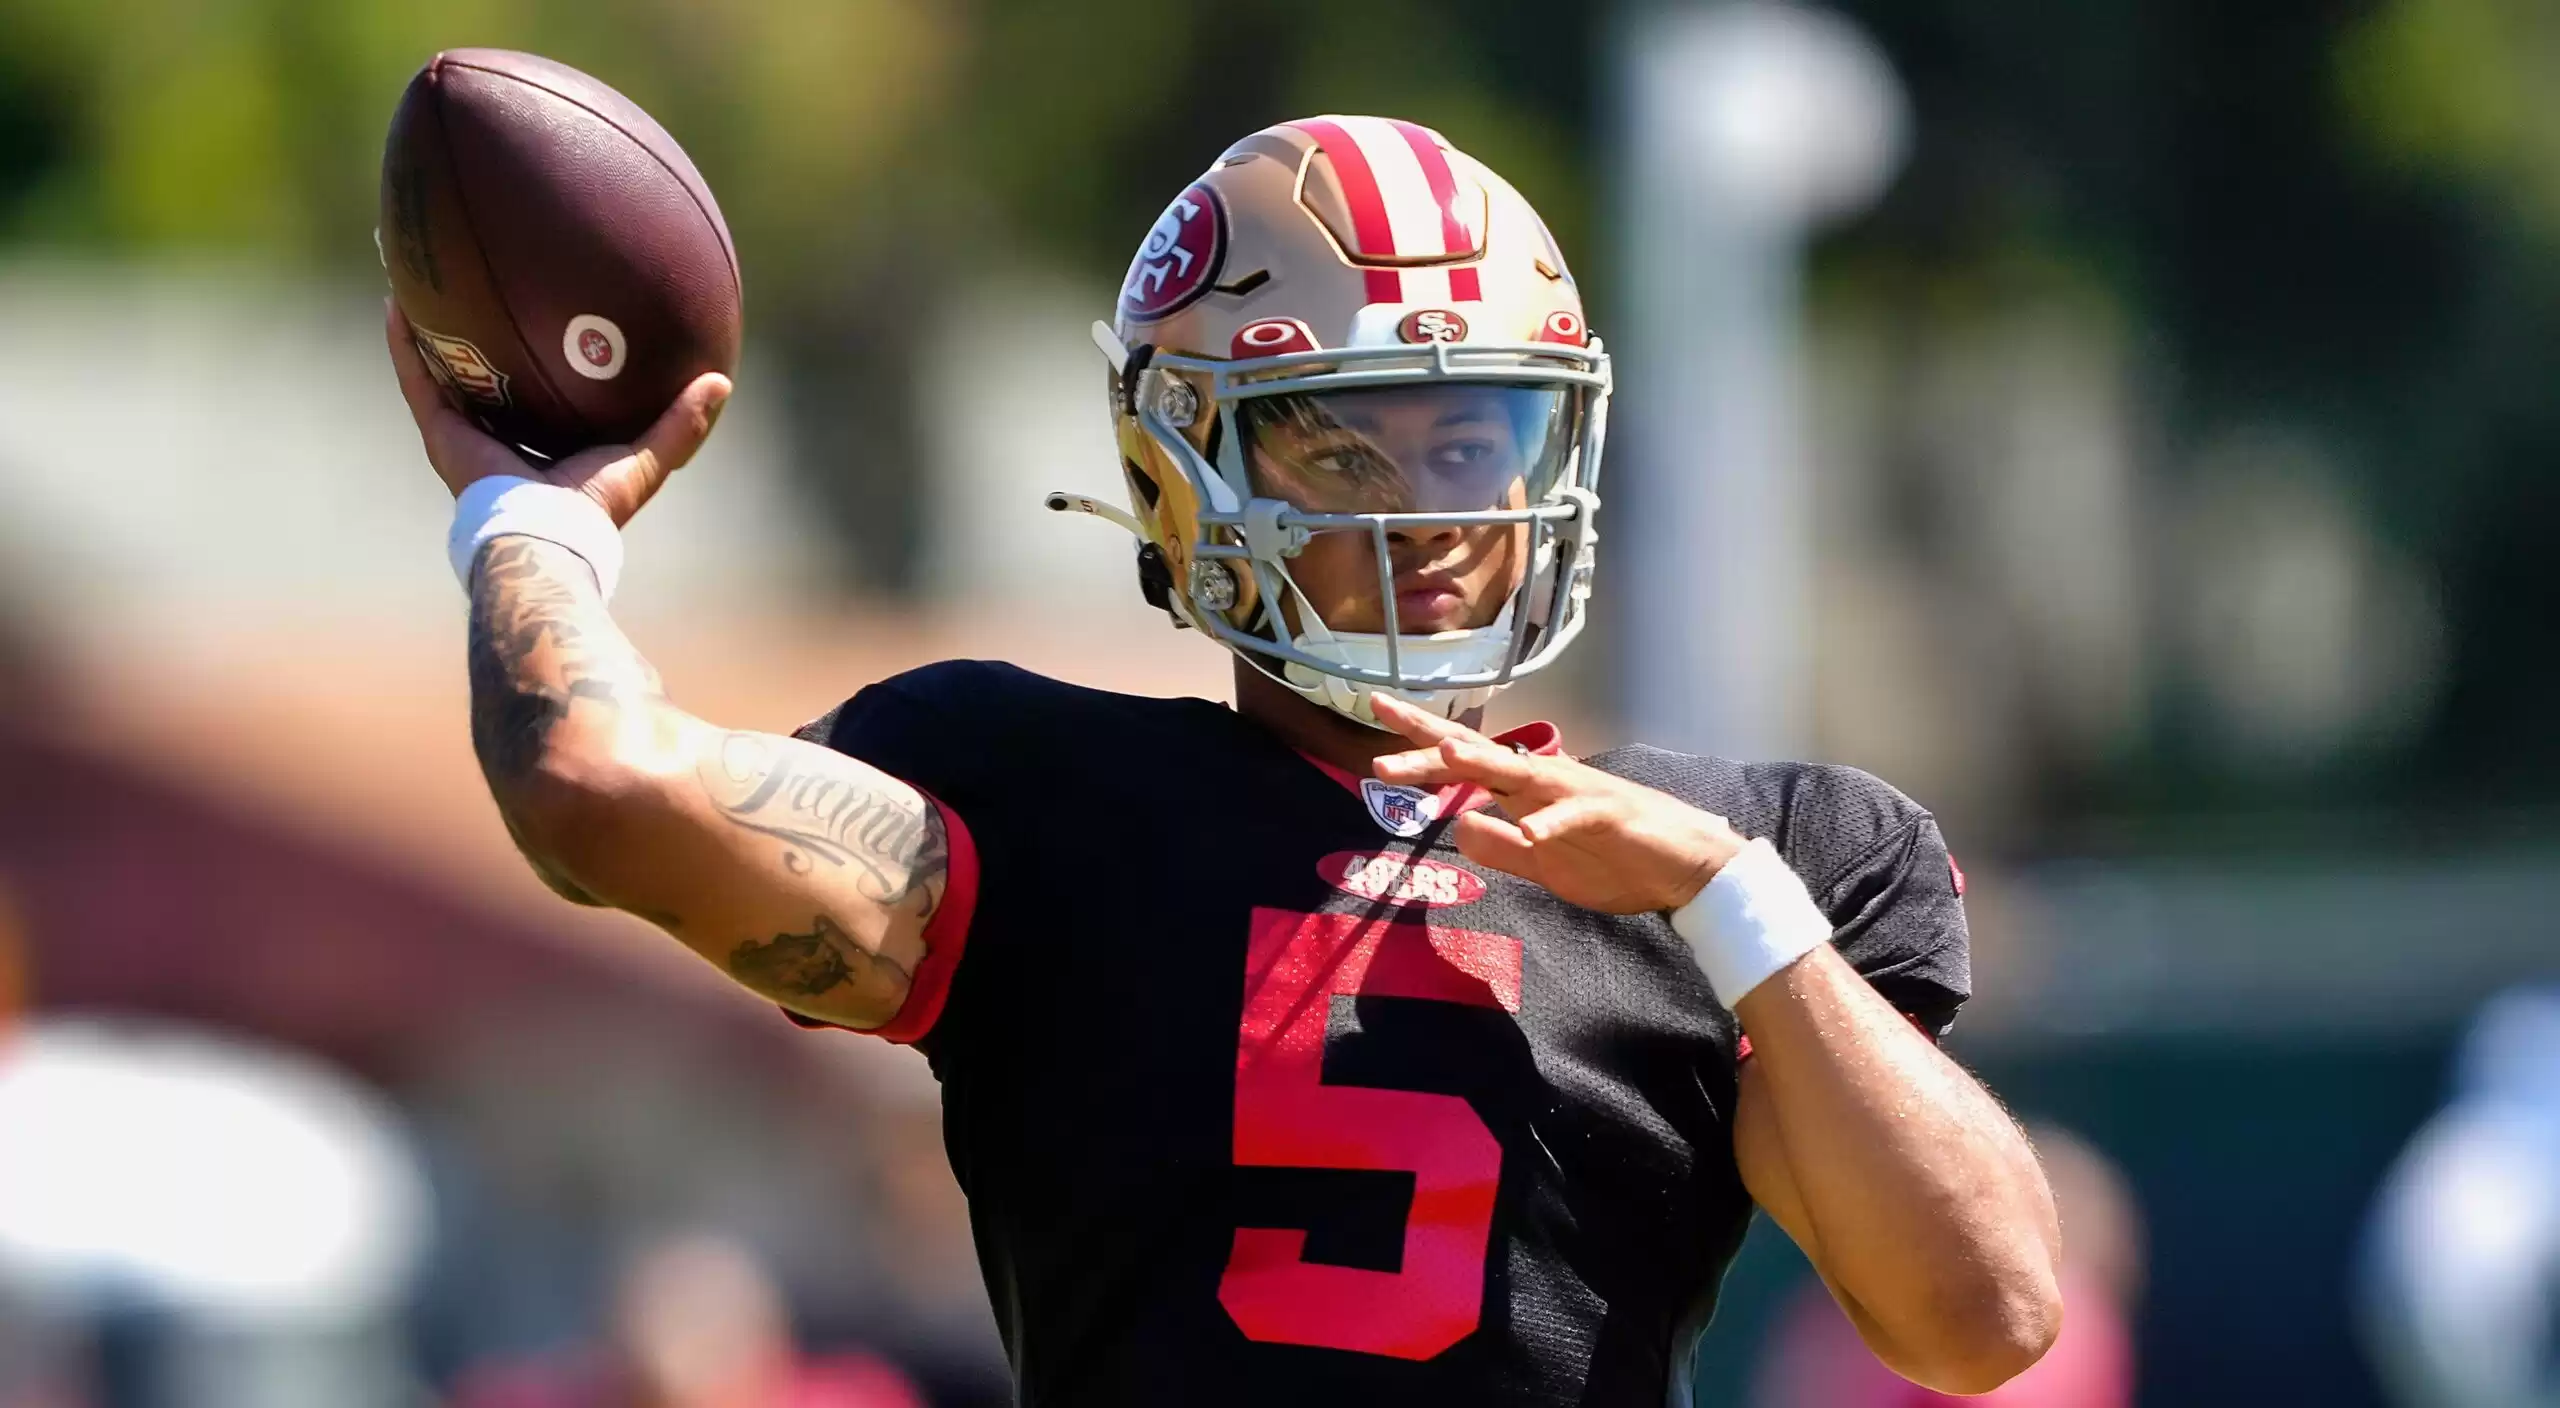 Surprise AFC Team Acquires 49ers QB Trey Lance in Blockbuster Trade, Putting Pressure on Their QB1